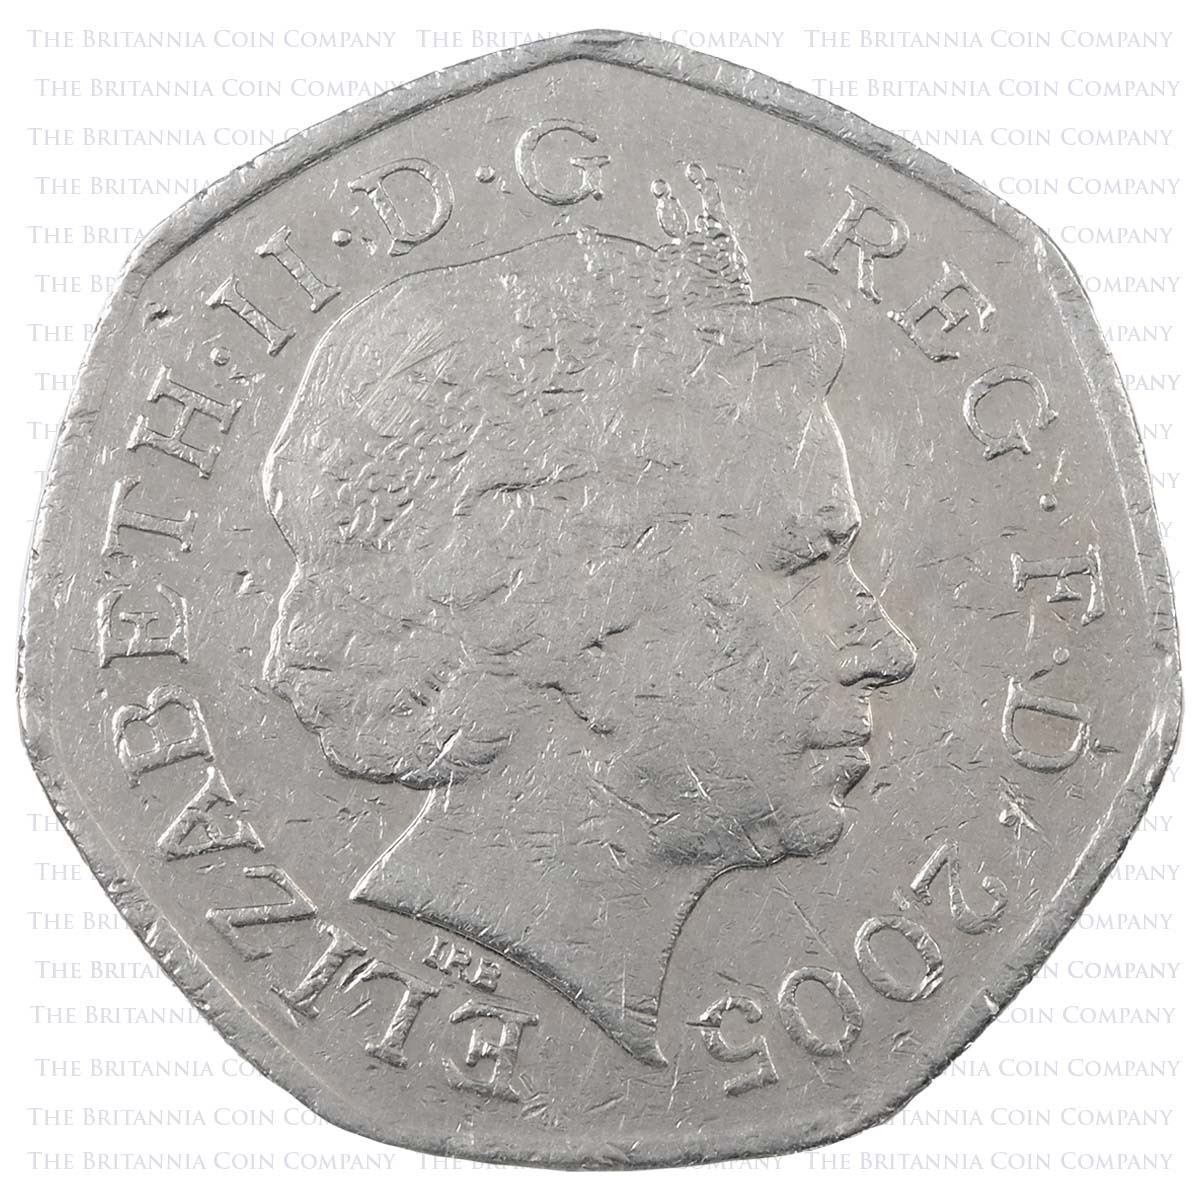 2005 Samuel Johnson's Dictionary Circulated Fifty Pence Coin Obverse